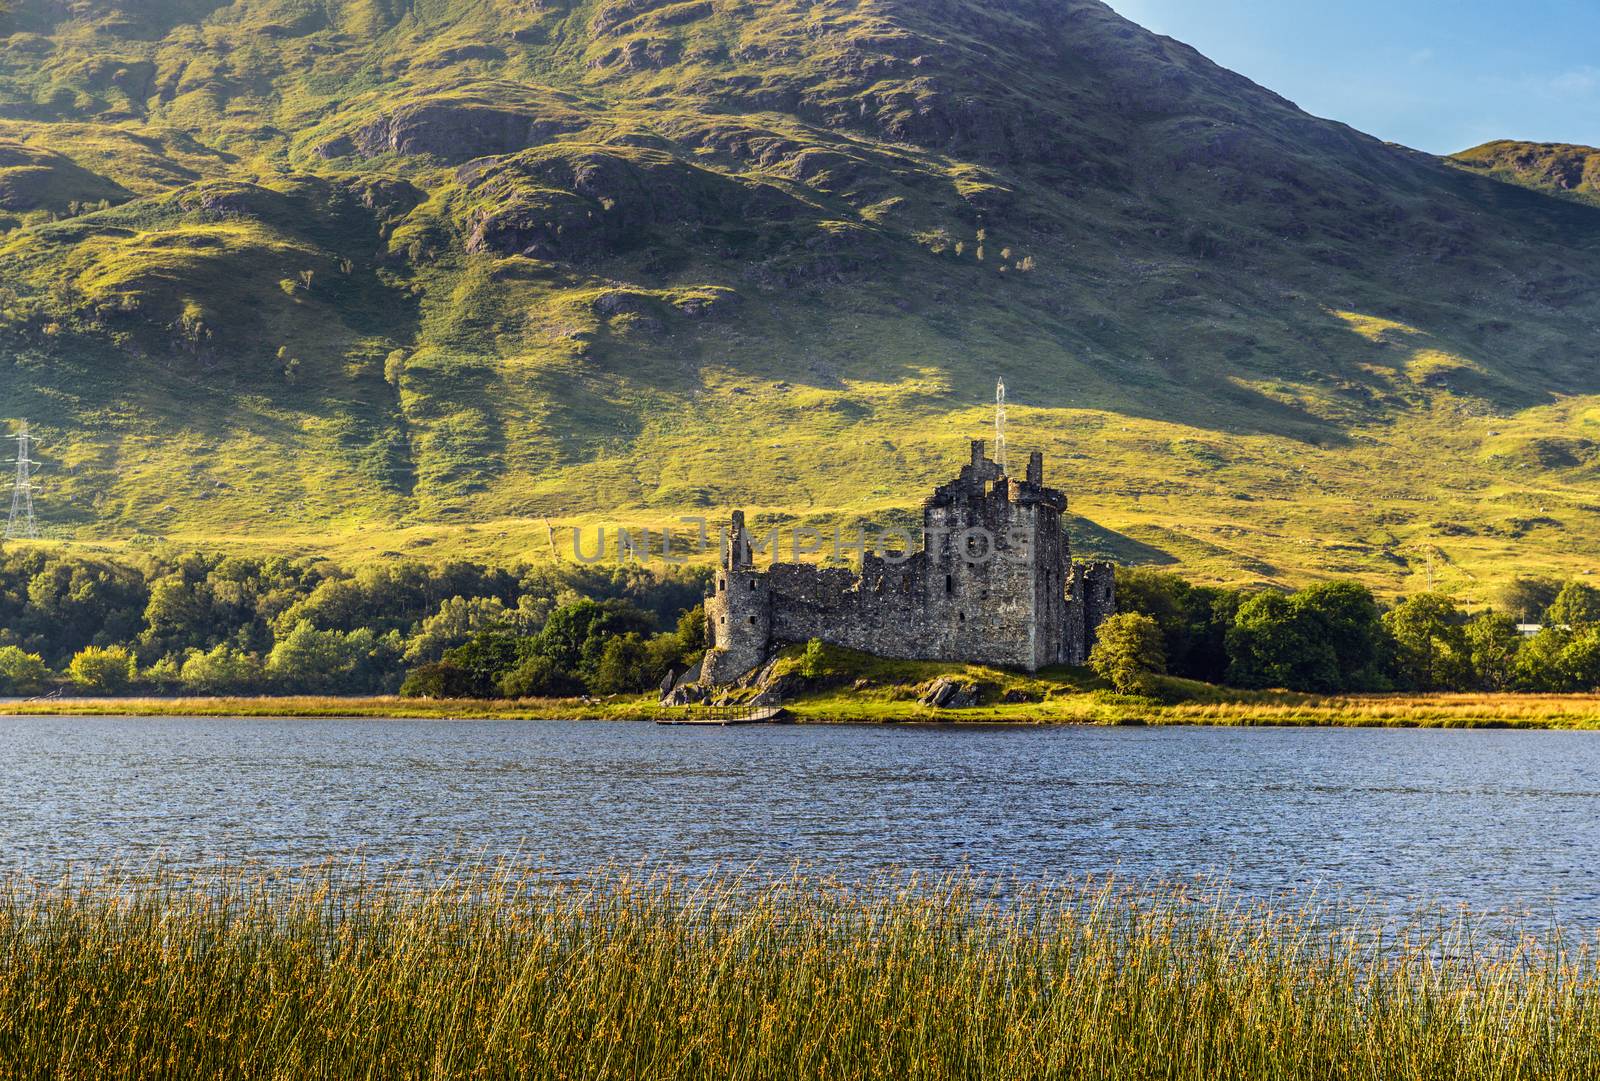 Ruin of Kilchurn Castle  at the northeastern end of Loch Awe, in Argyll and Bute, Scotland